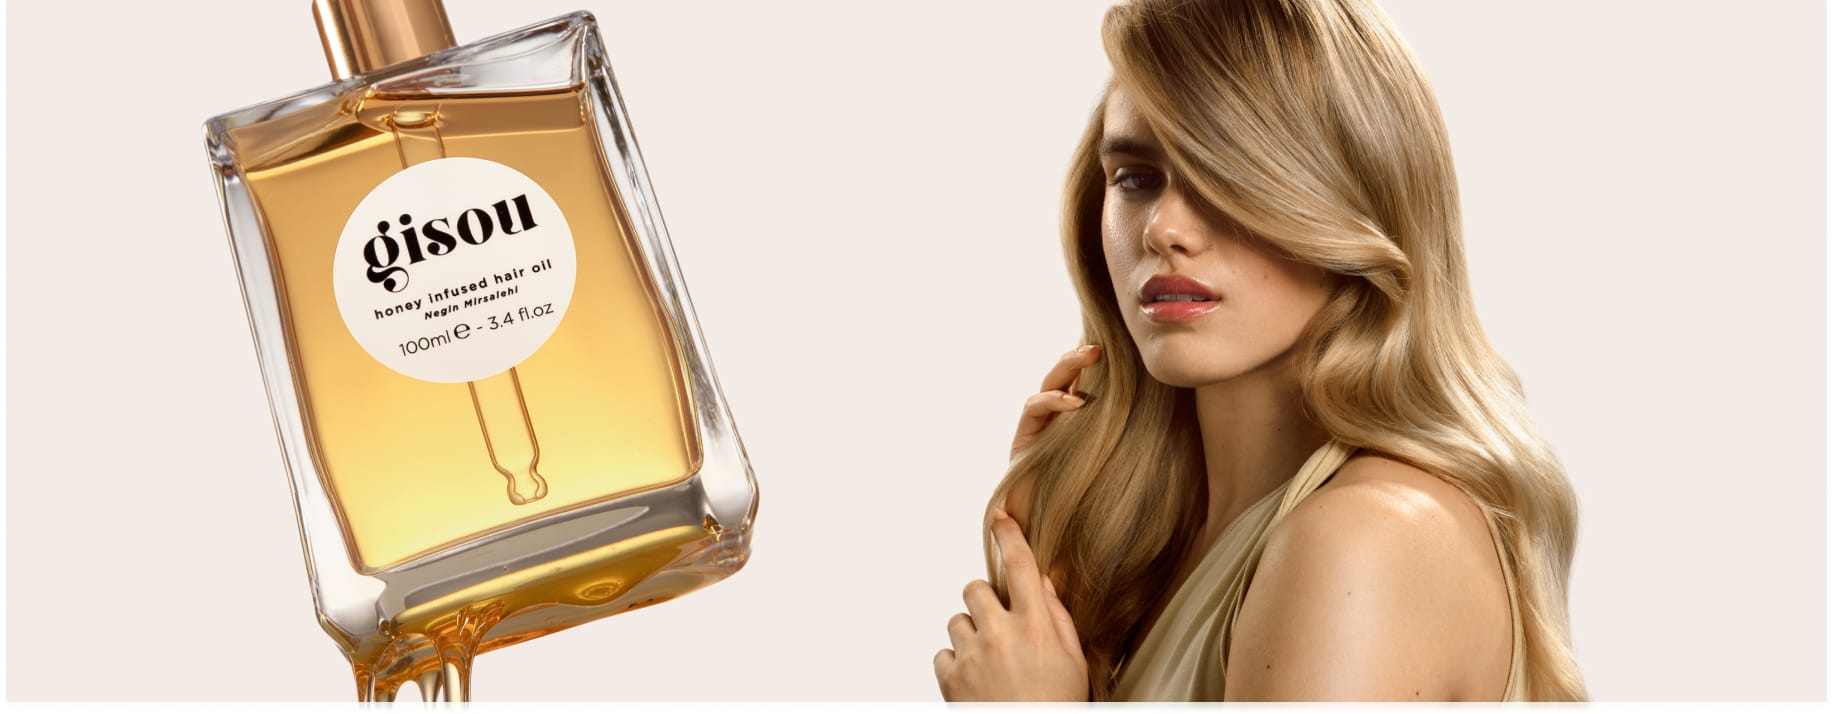 Model with long hair with bottle of hair oil